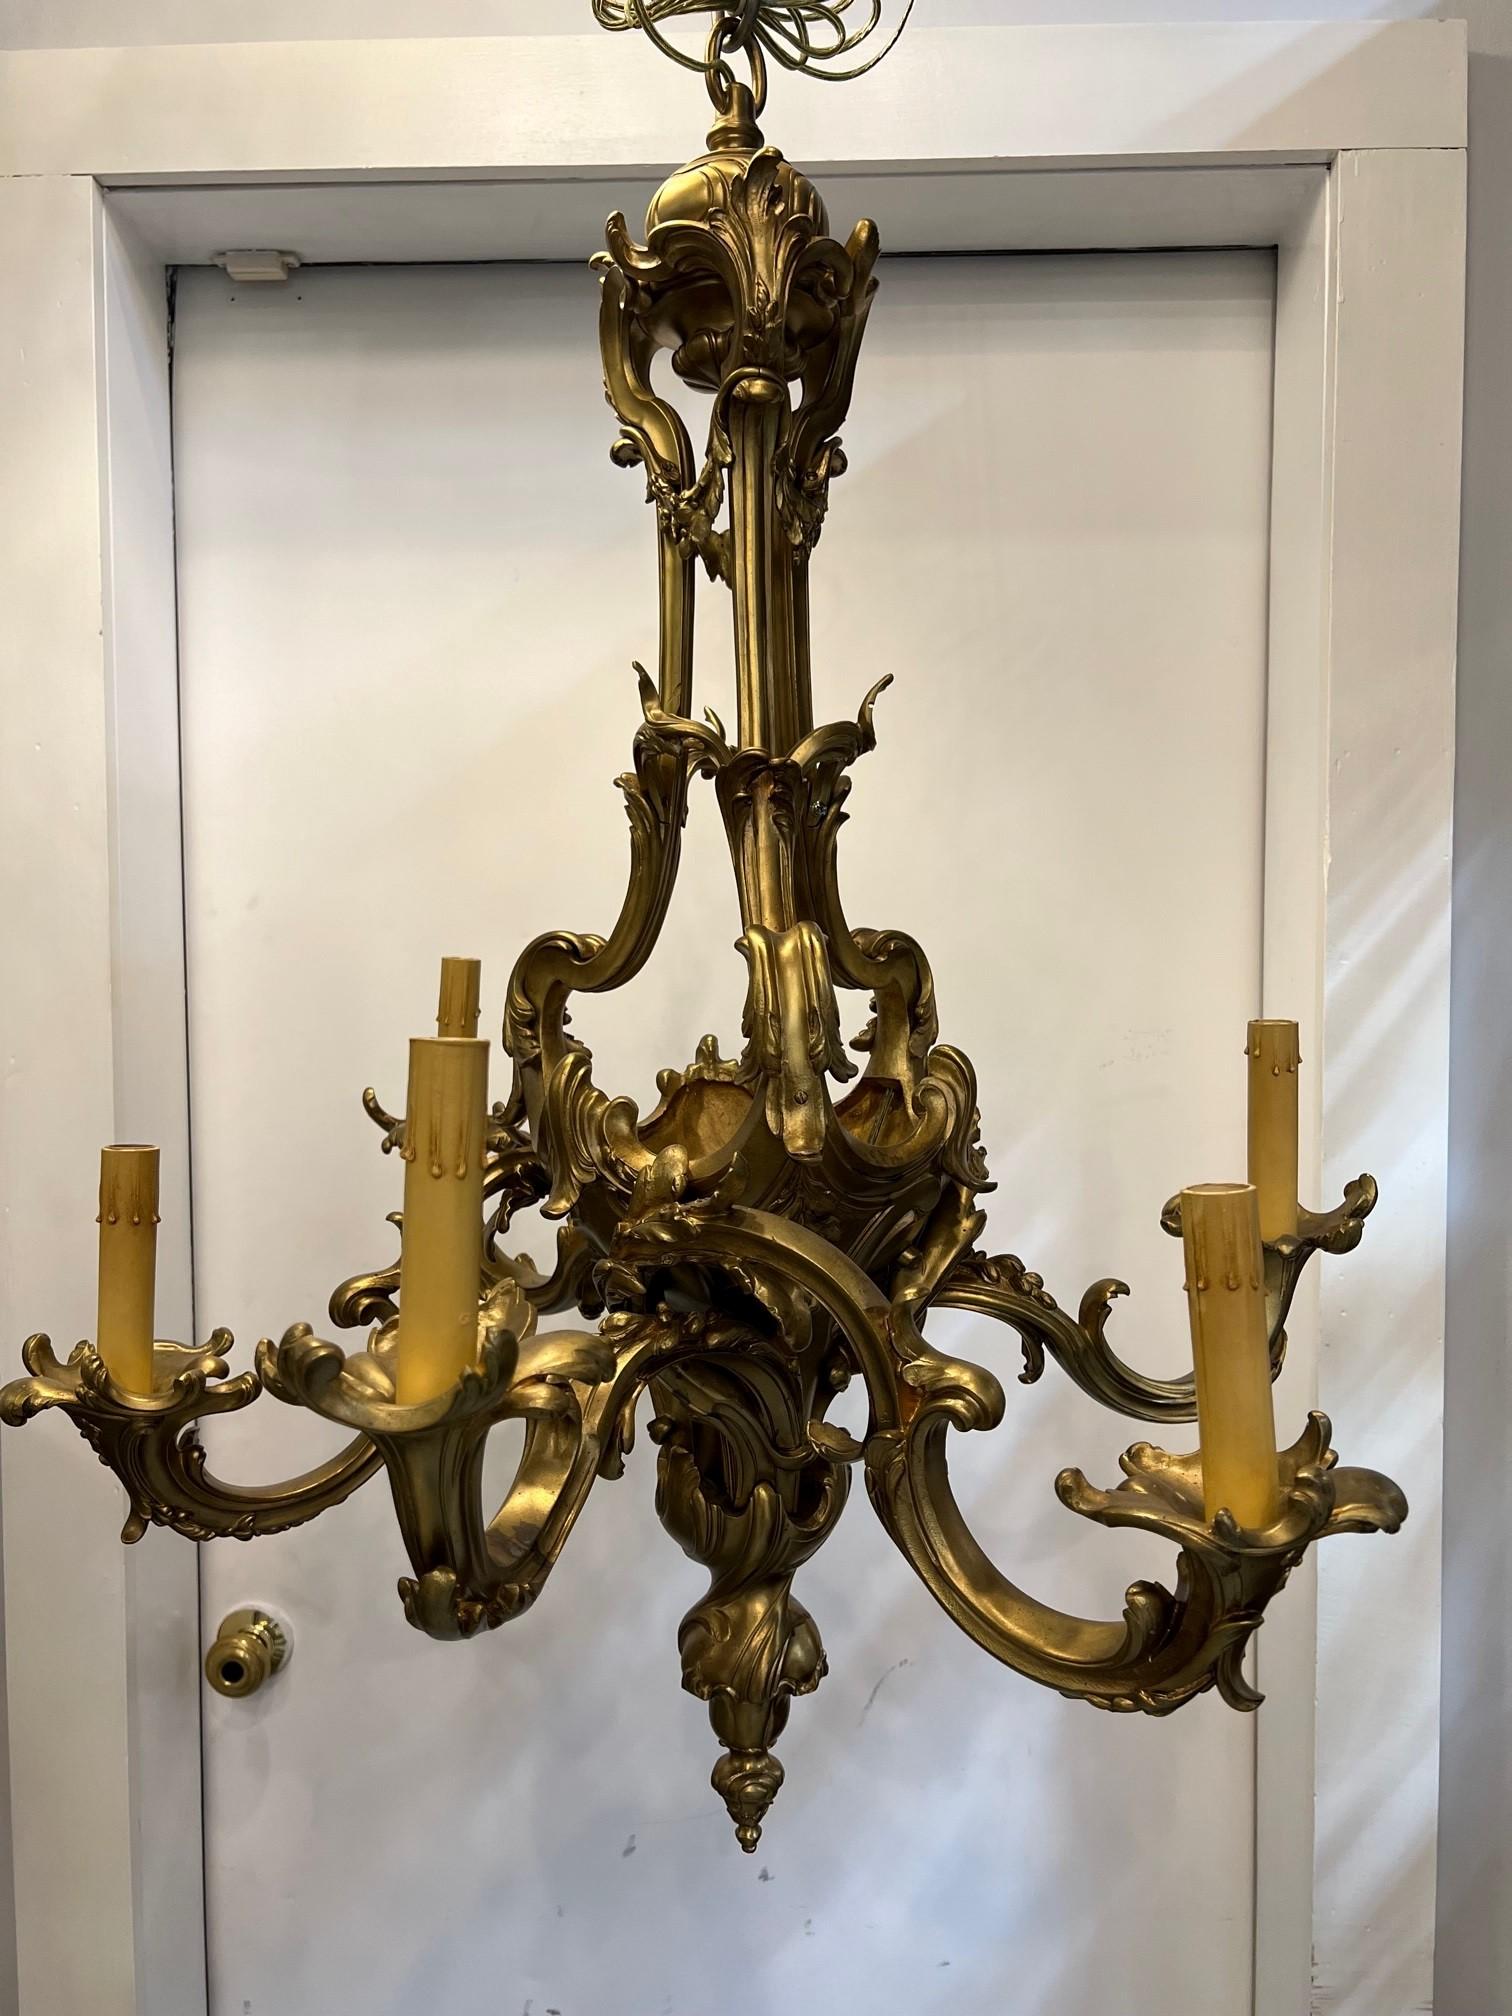 Antique Louis XV style bronze chandelier with Rococo influence. A graceful French Rococo style five arm gilt bronze chandelier recently rewired from an estate in Westchester County NY.  